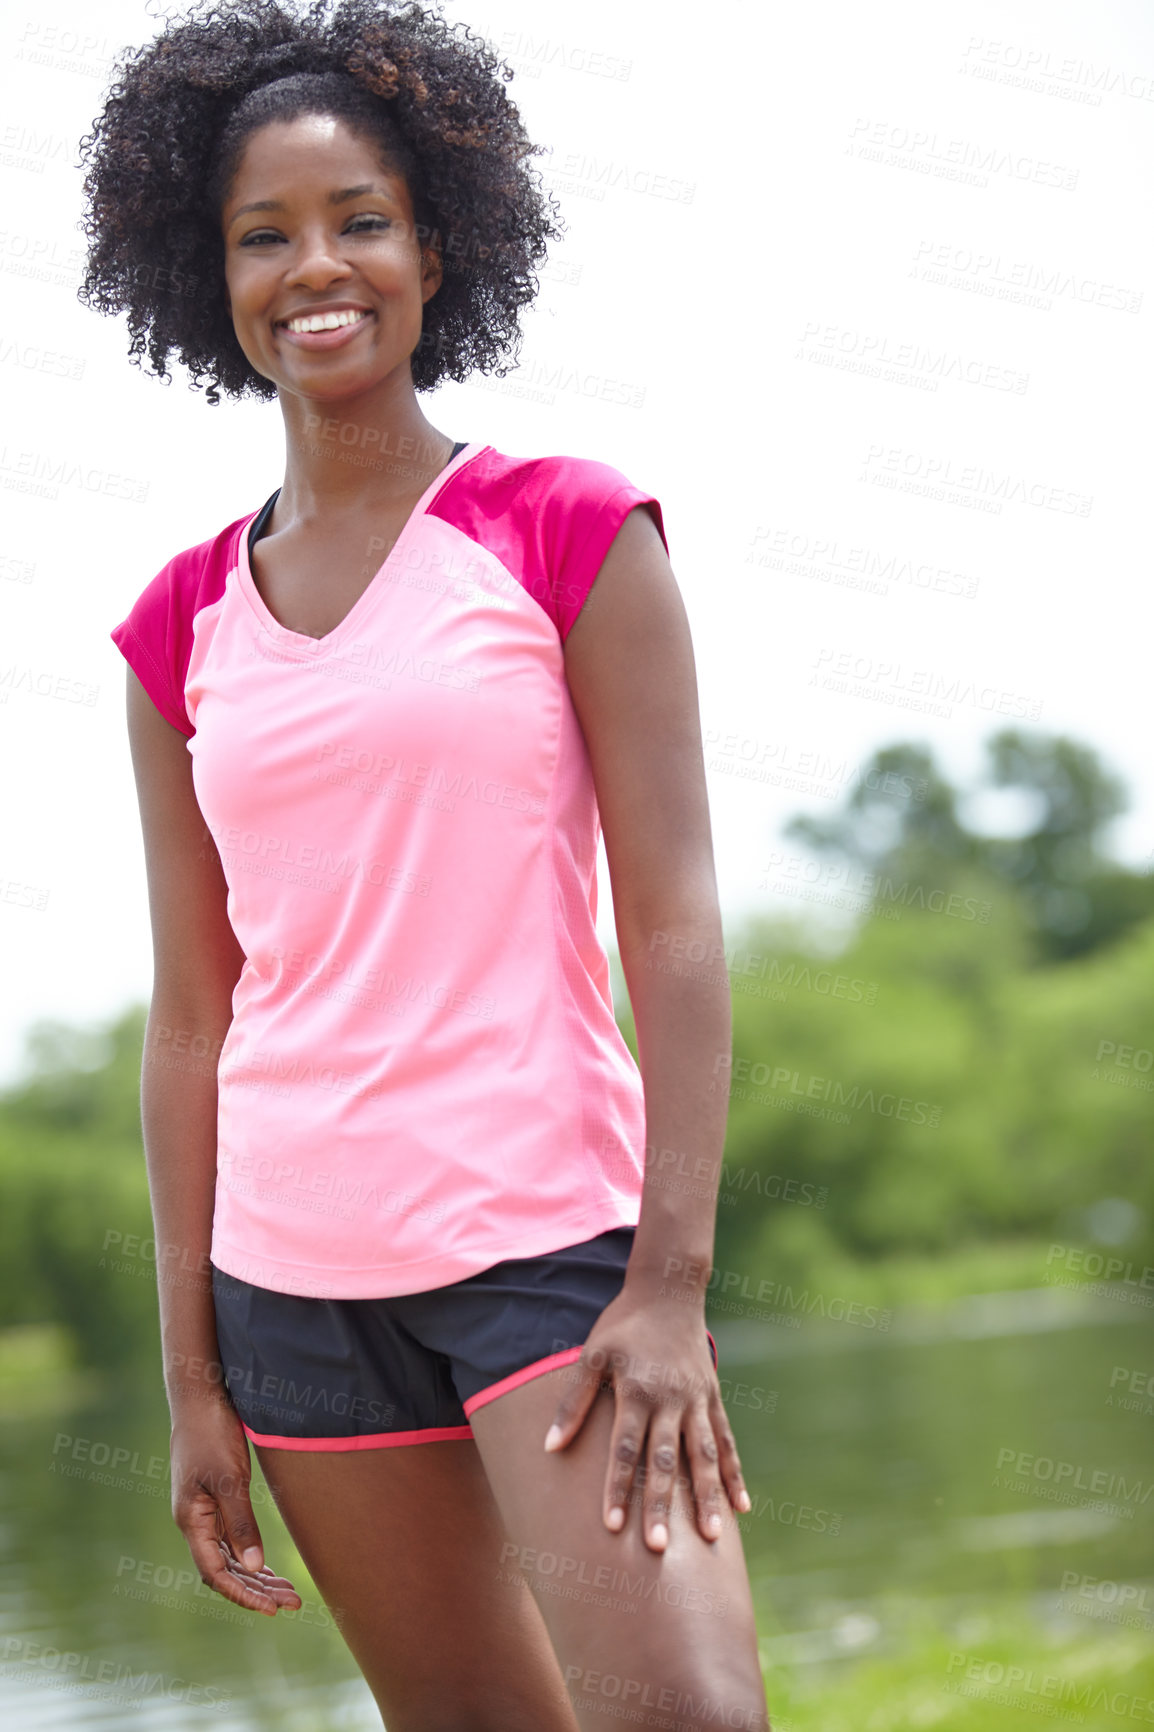 Buy stock photo Cropped portrait of a female athlete smiling widely and standing outdoors in a casual stance